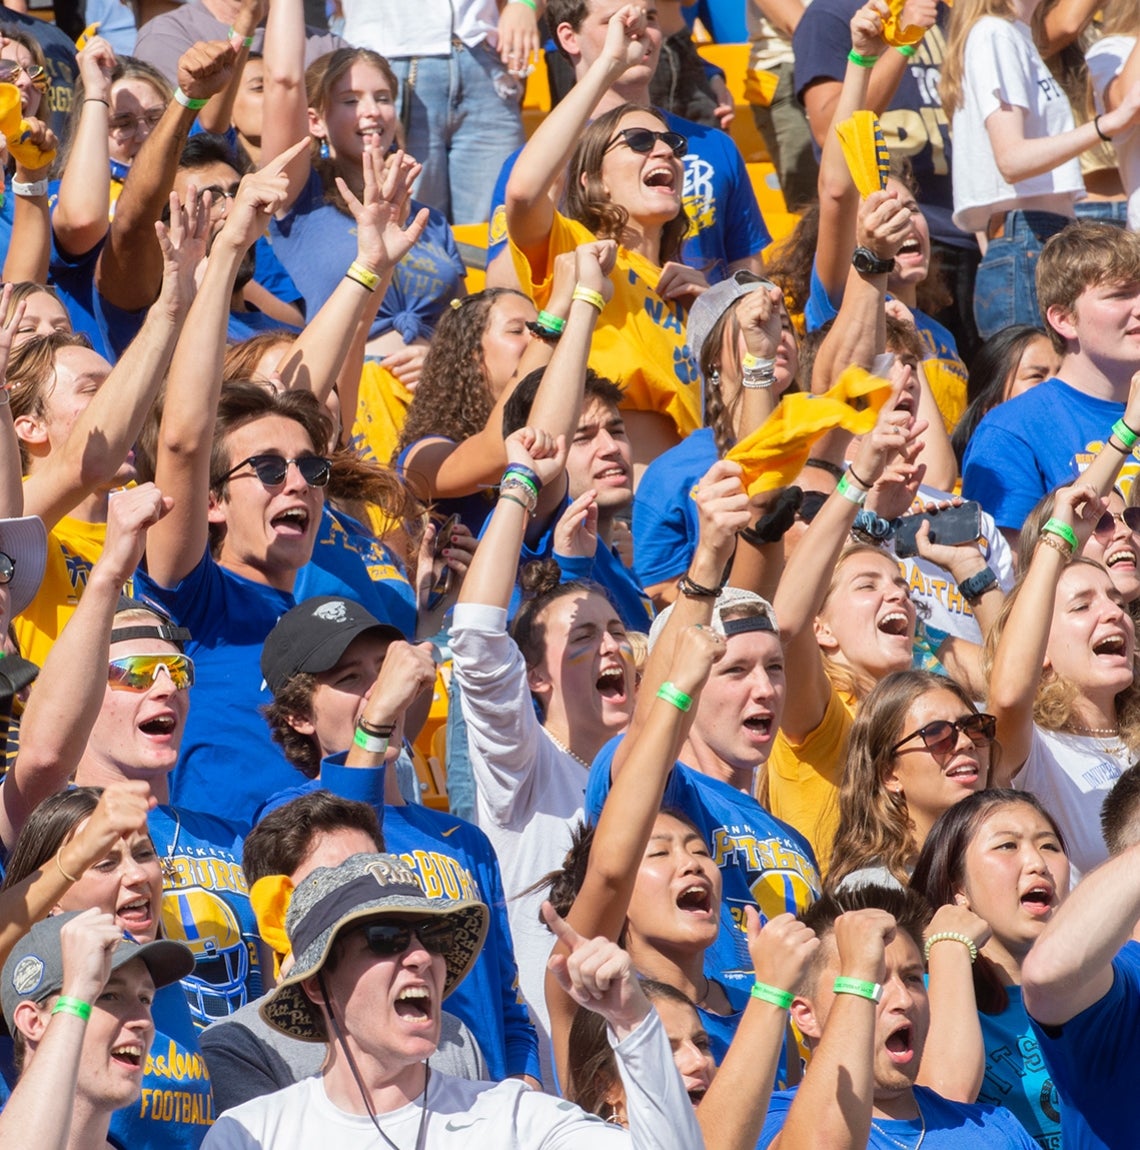 crowd of students wearing blue and gold, arms raised, yelling and standing in stadium seating